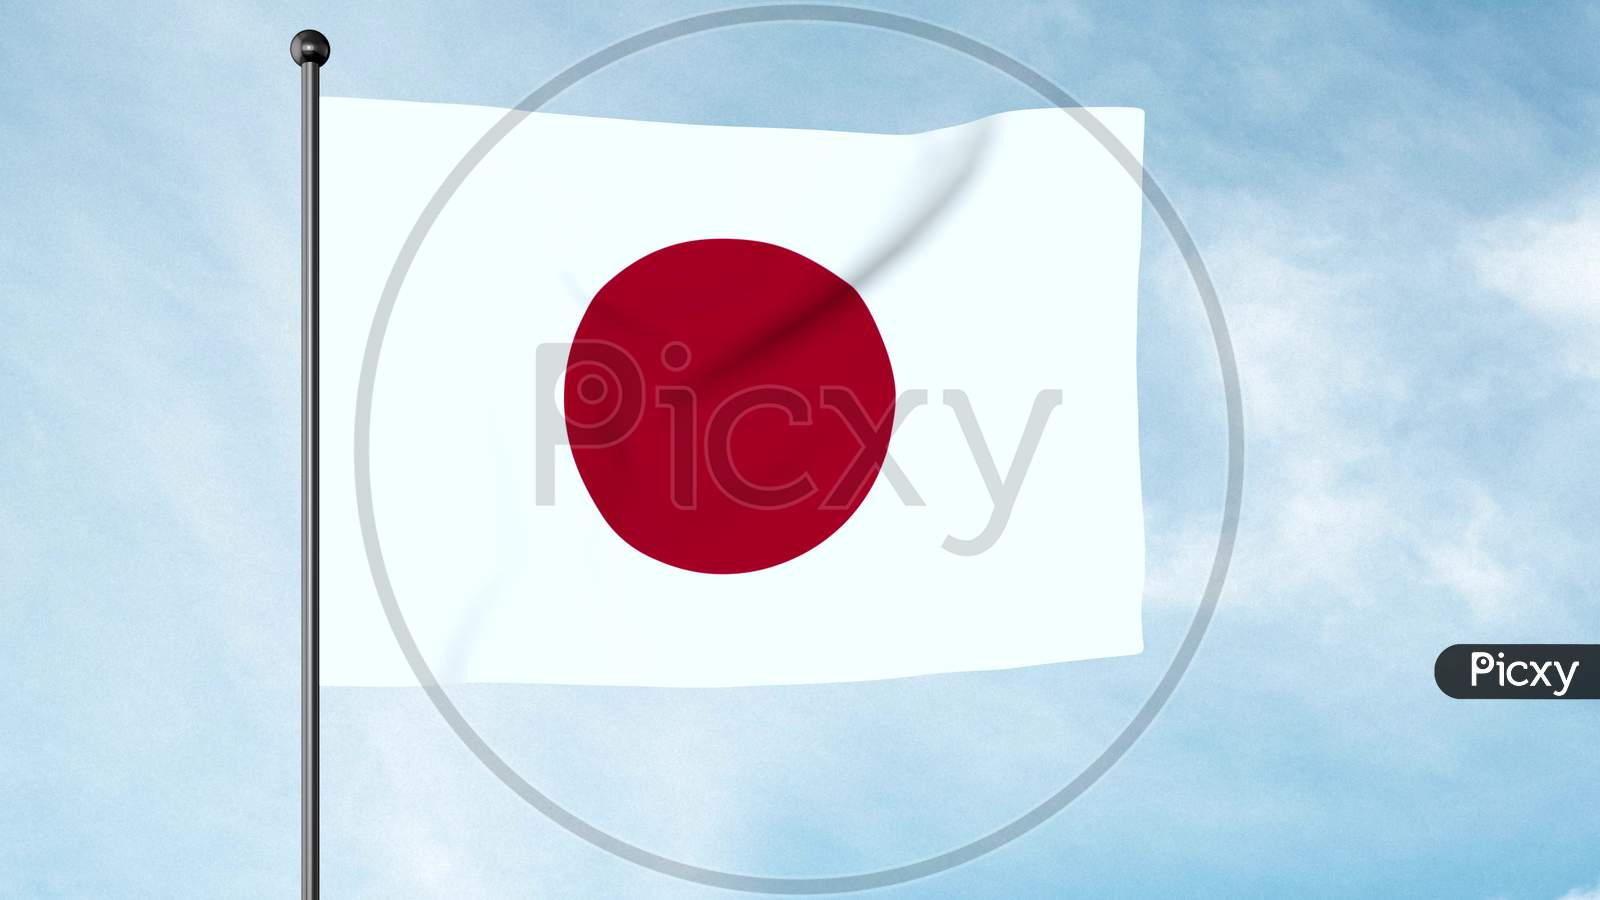 3D Illustration Of The National Flag Of Japan Is A Rectangular White Banner Bearing A Crimson-Red Circle At Its Centre. Nisshōki, Hinomaru. Land Of The Rising Sun.